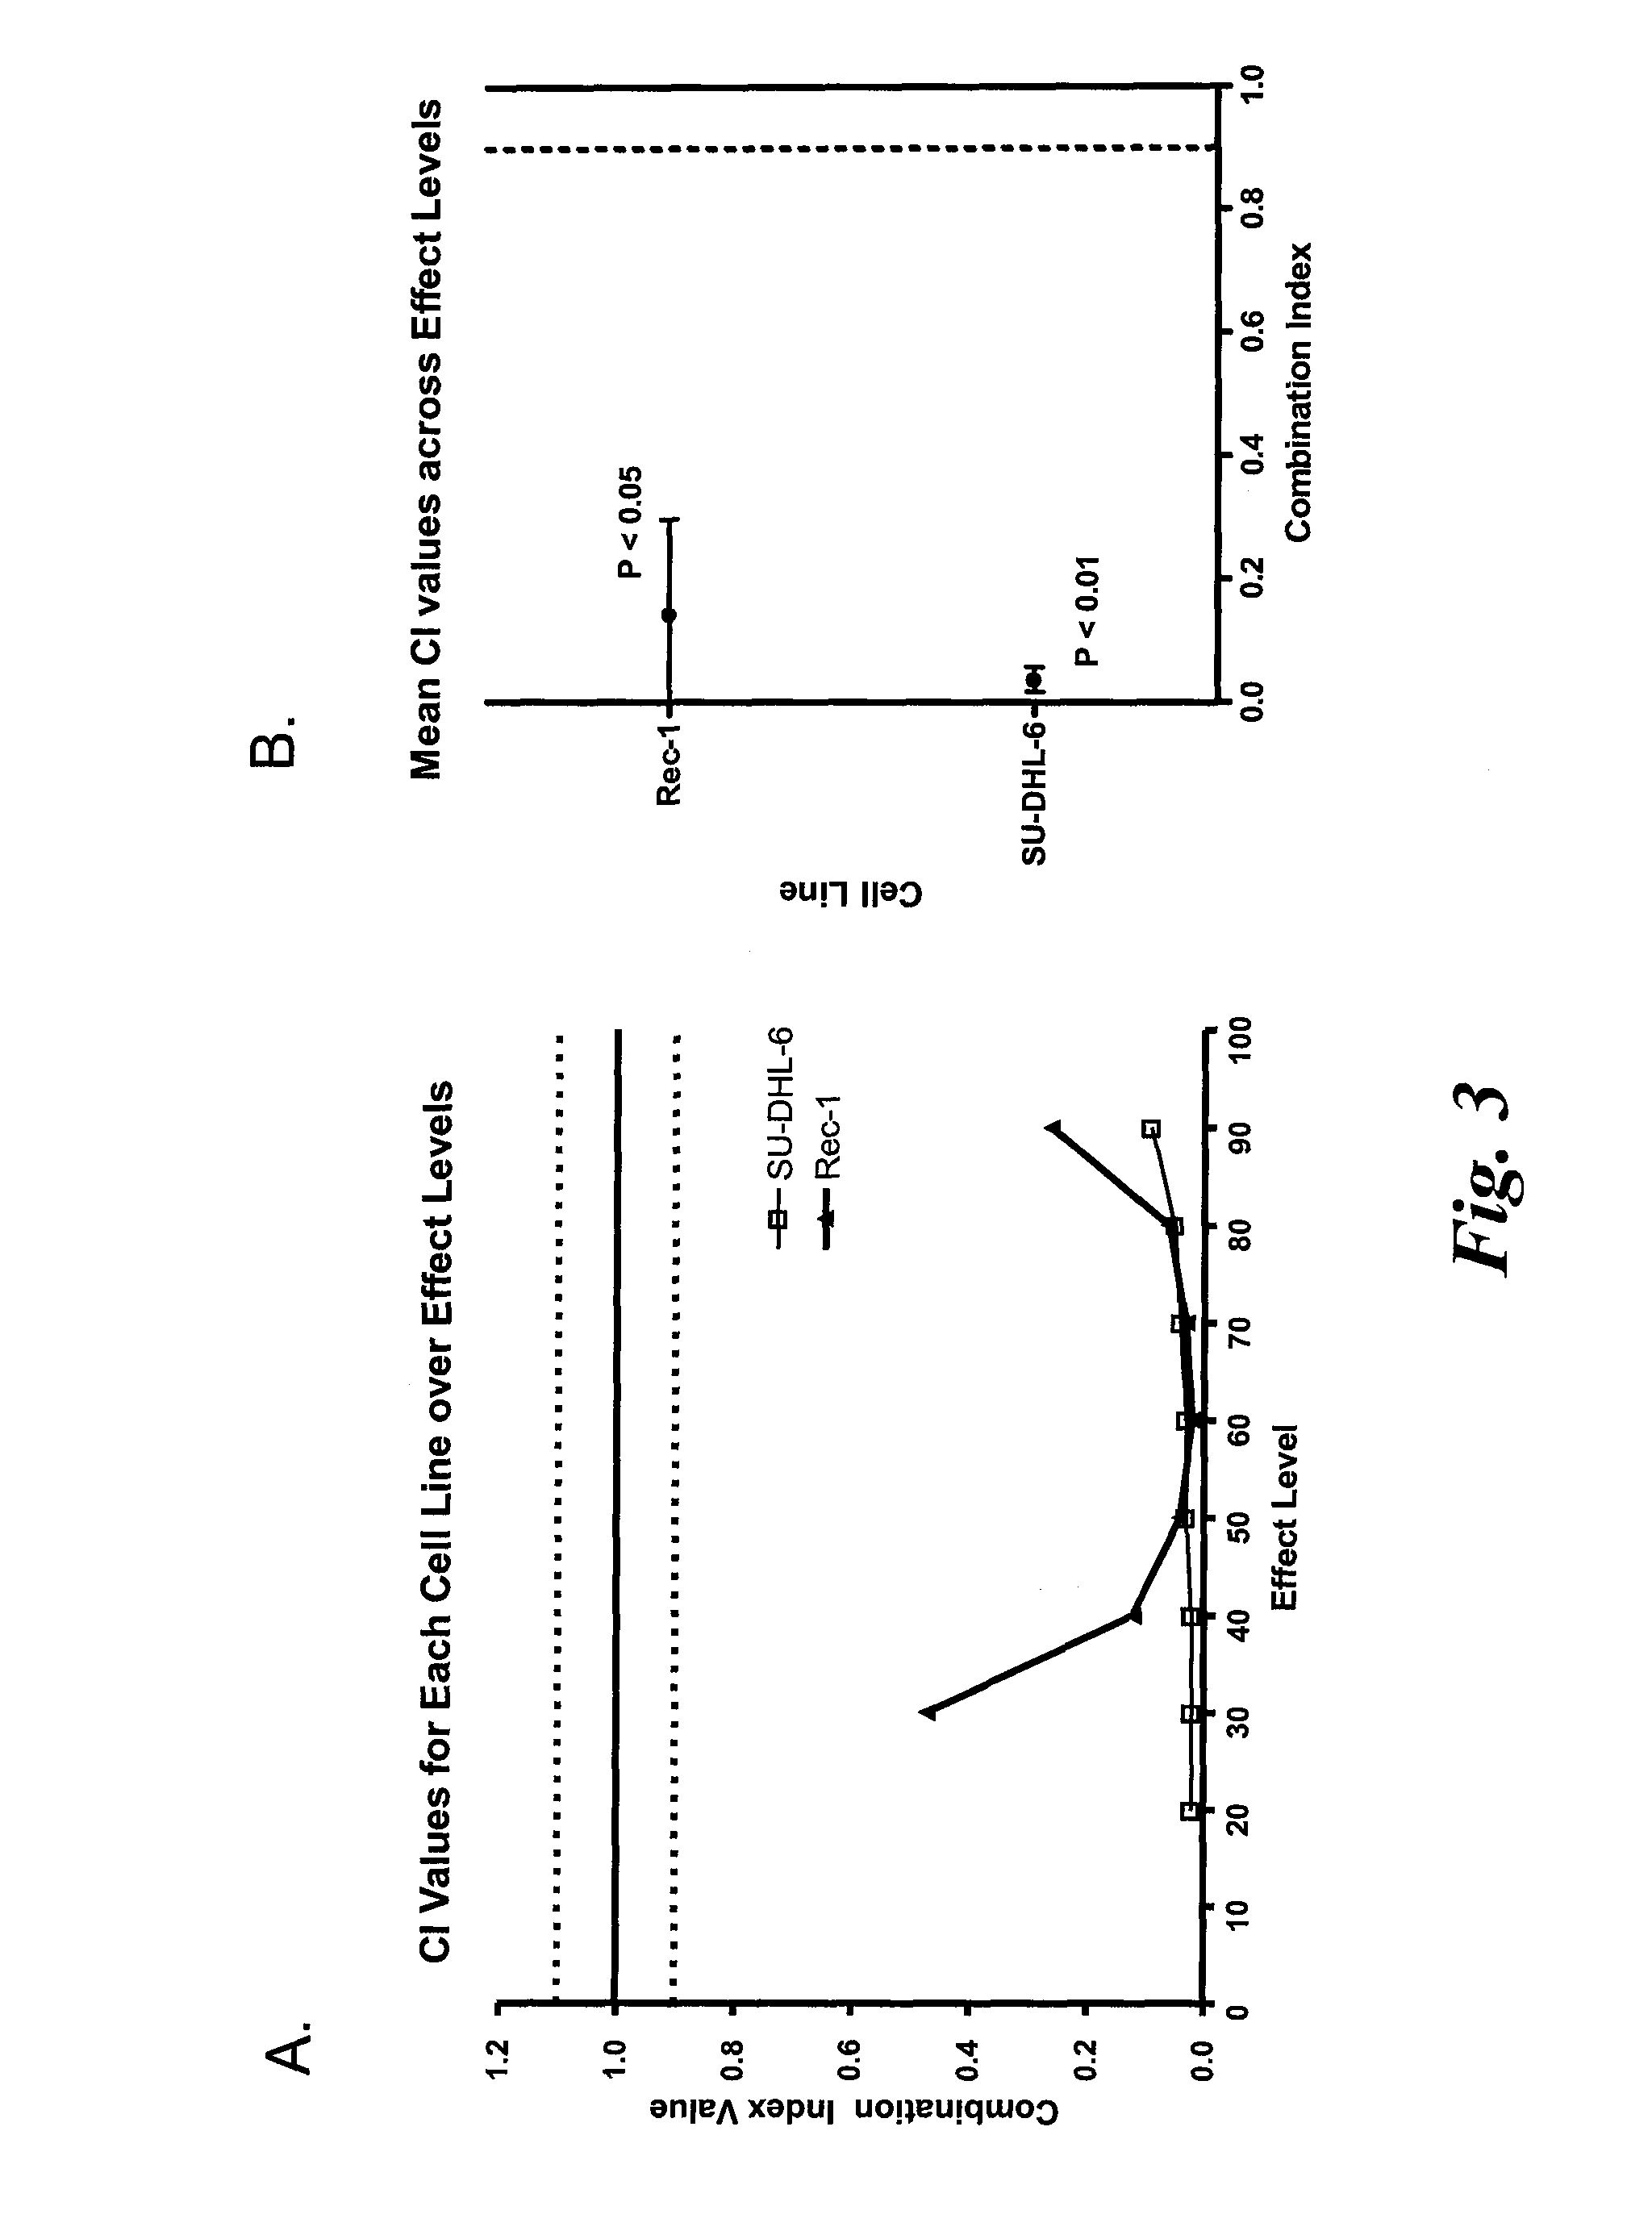 Cd37 immunotherapeutic combination therapies and uses thereof